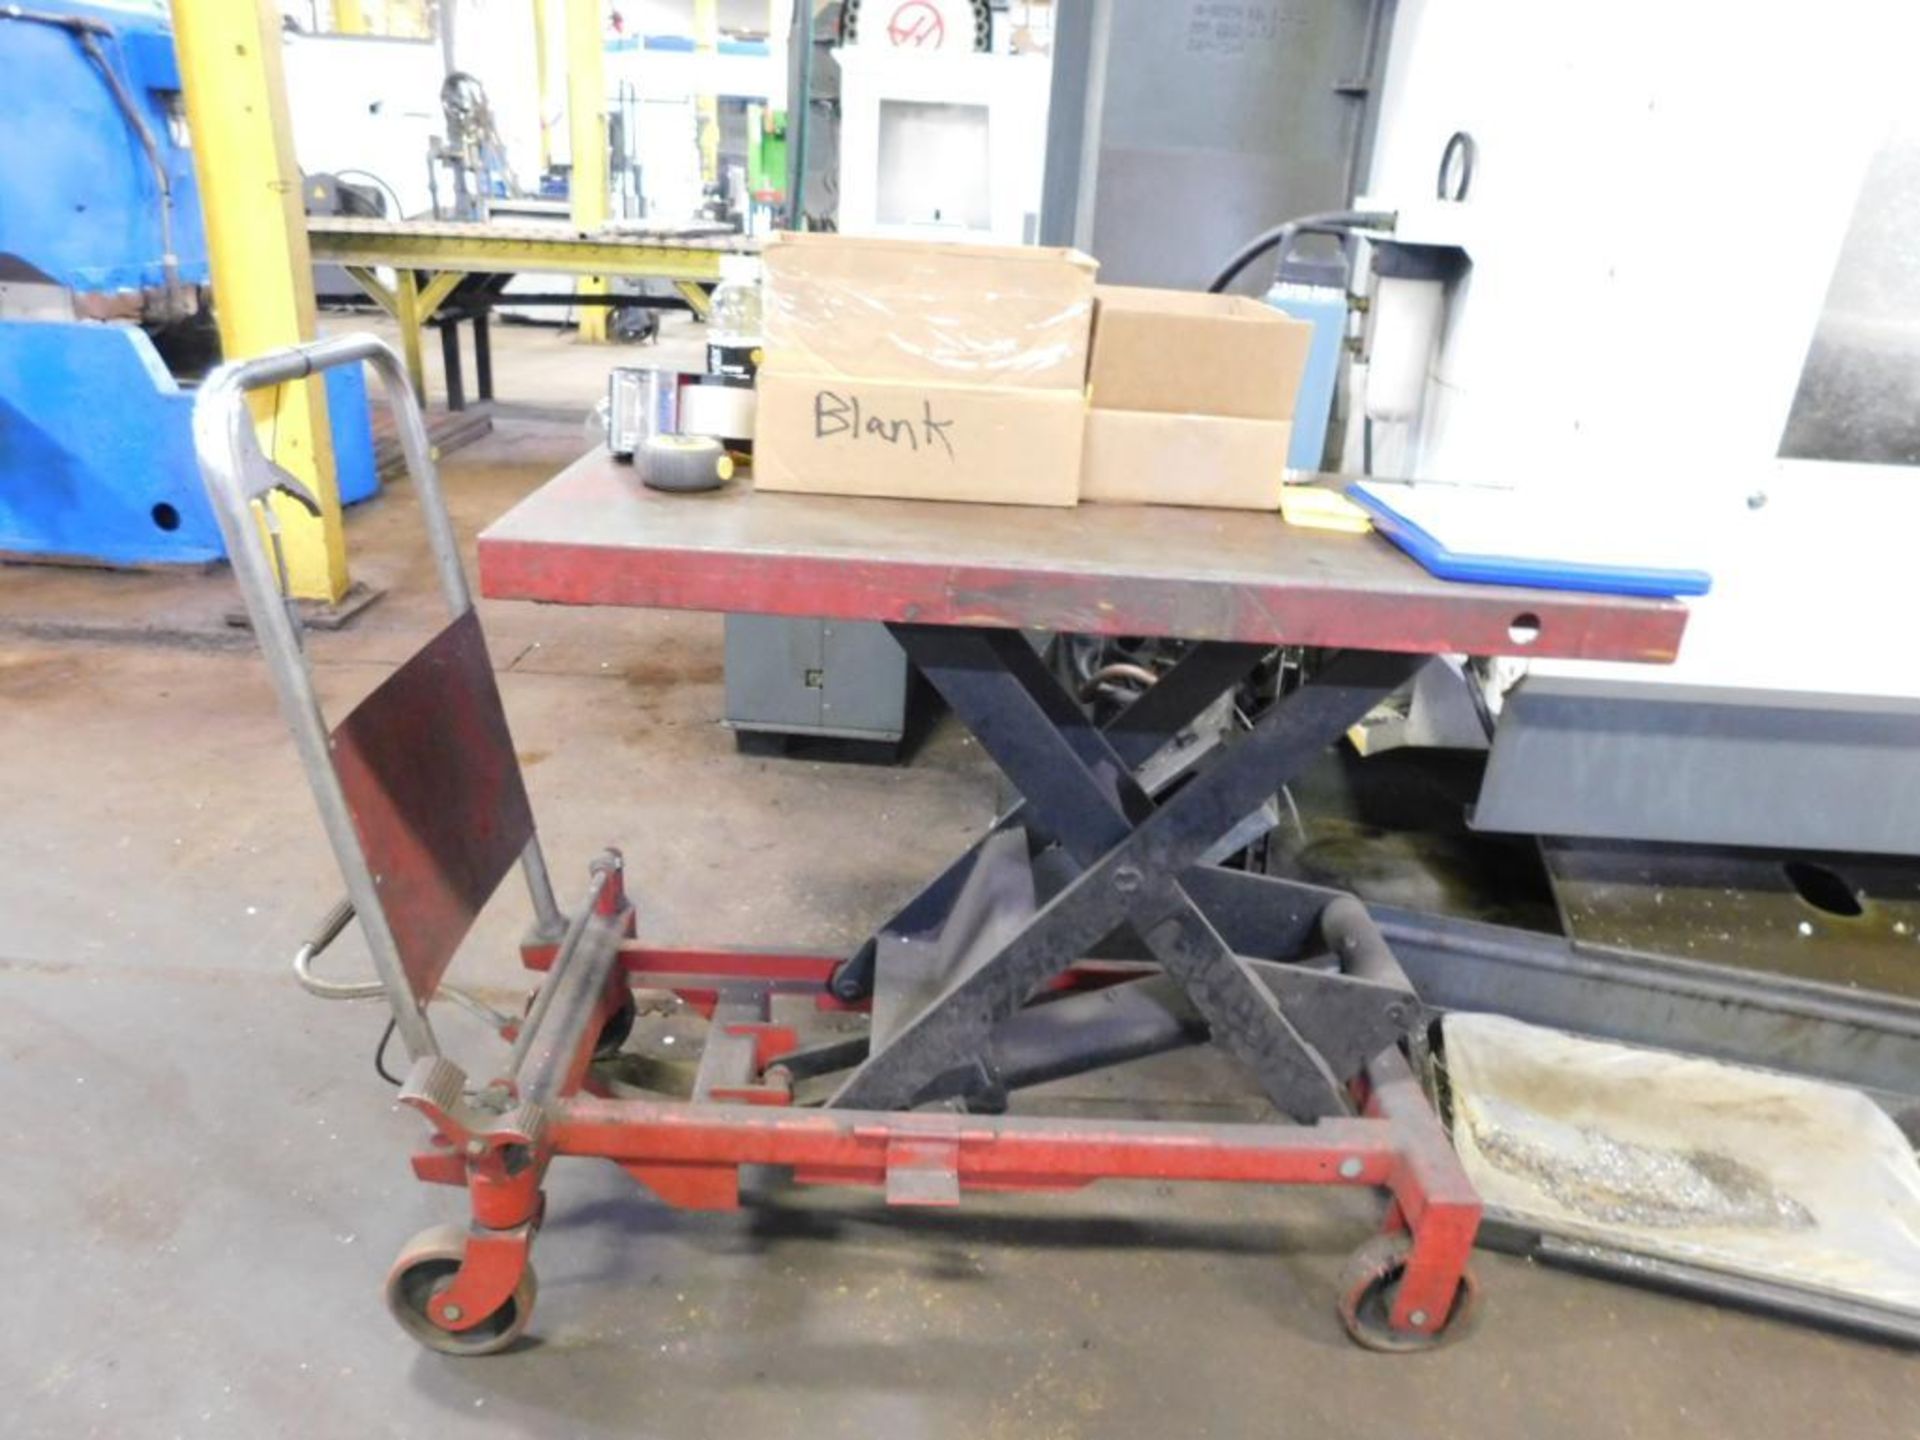 40" x 20" U-Line H-1783 1,760 Lb. Hydraulic Lift Table (DOESN'T LIFT) - Image 2 of 3